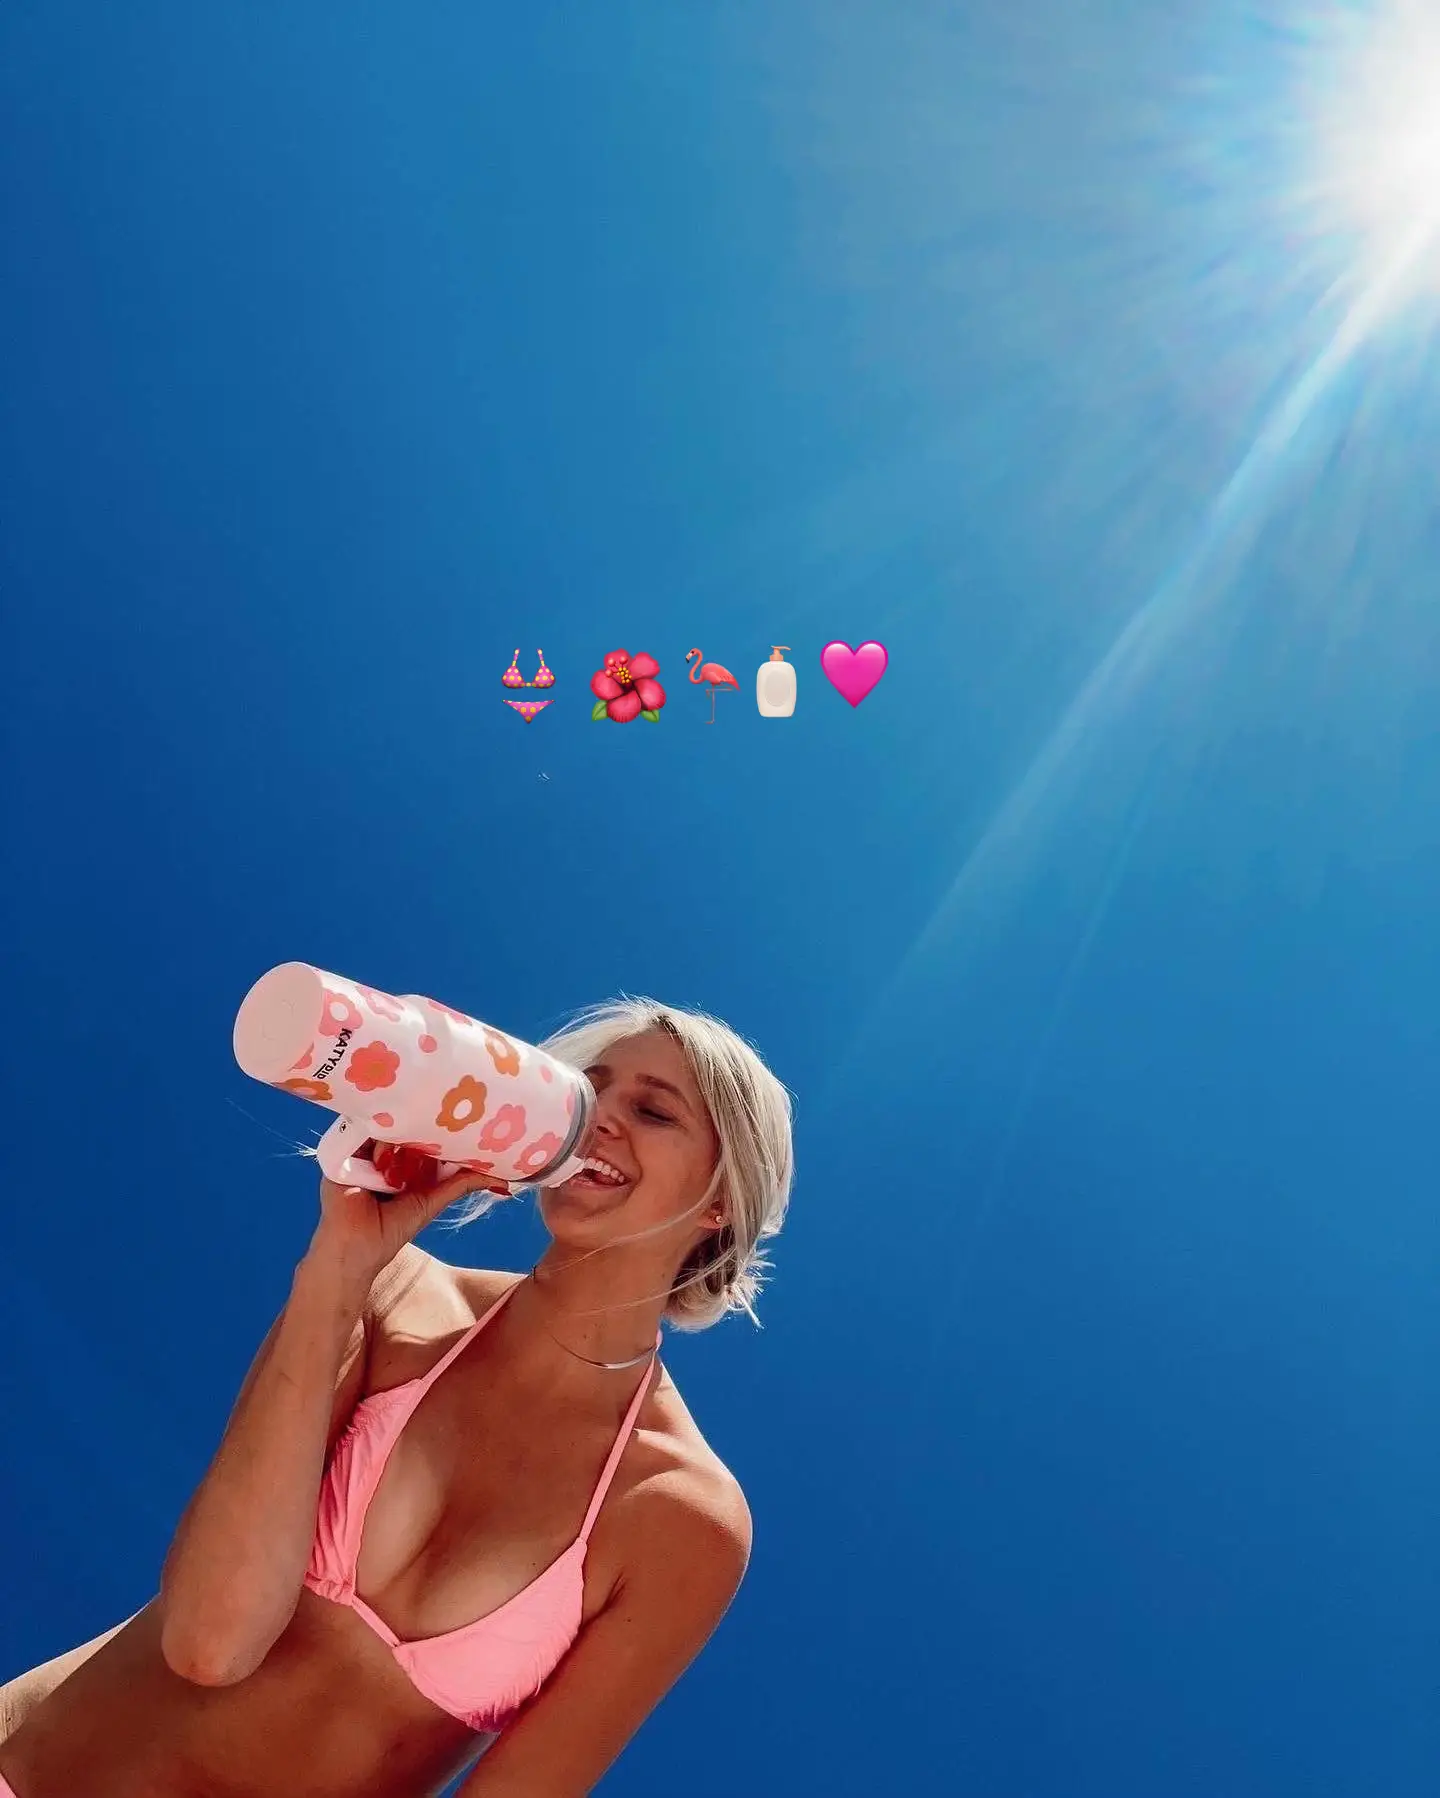  A woman in a pink bikini is drinking from a cup.